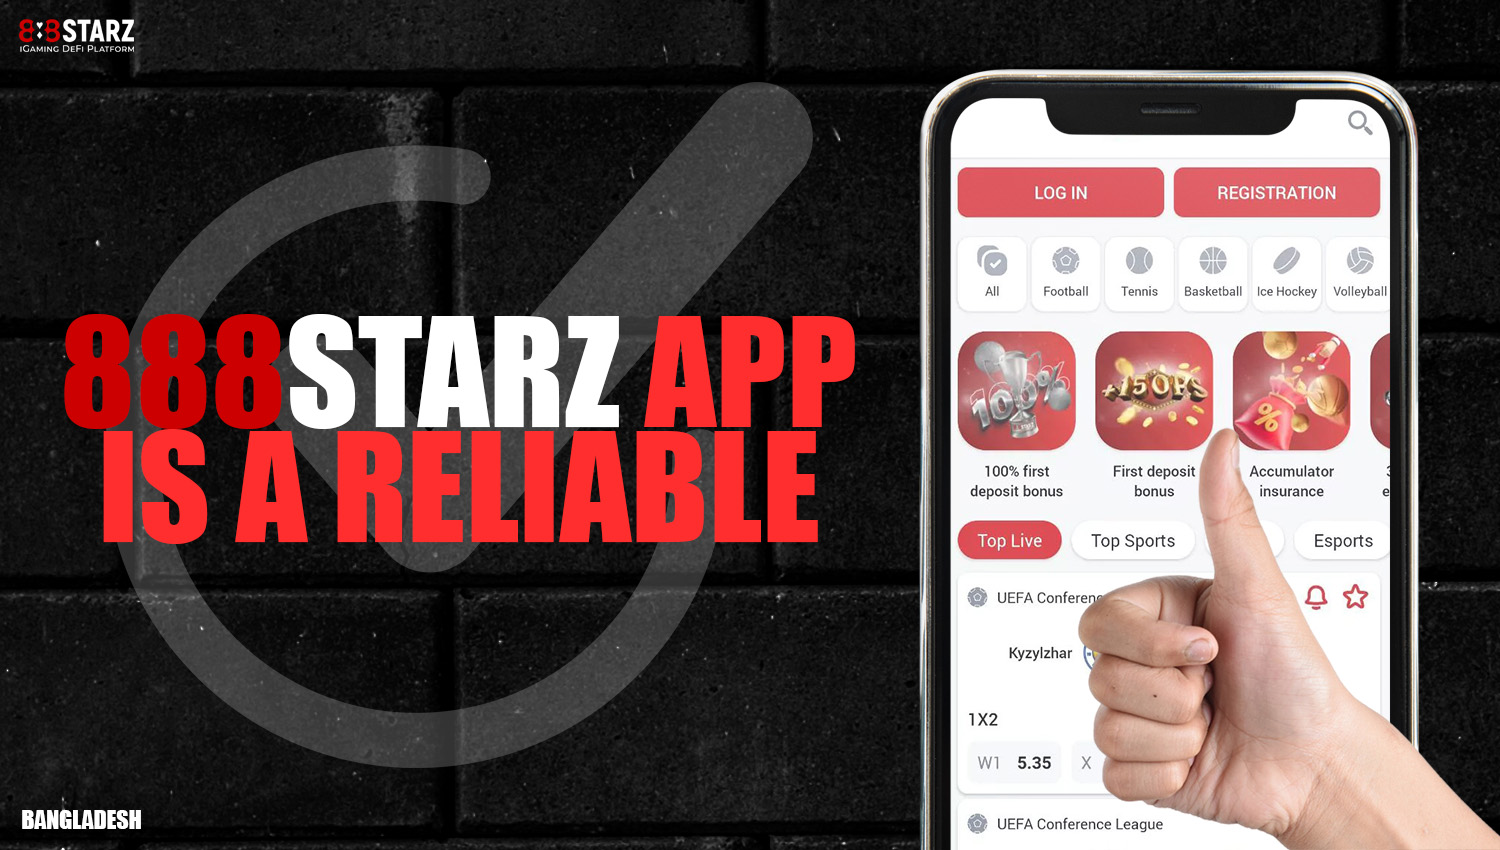 The 888starz mobile app is completely secure